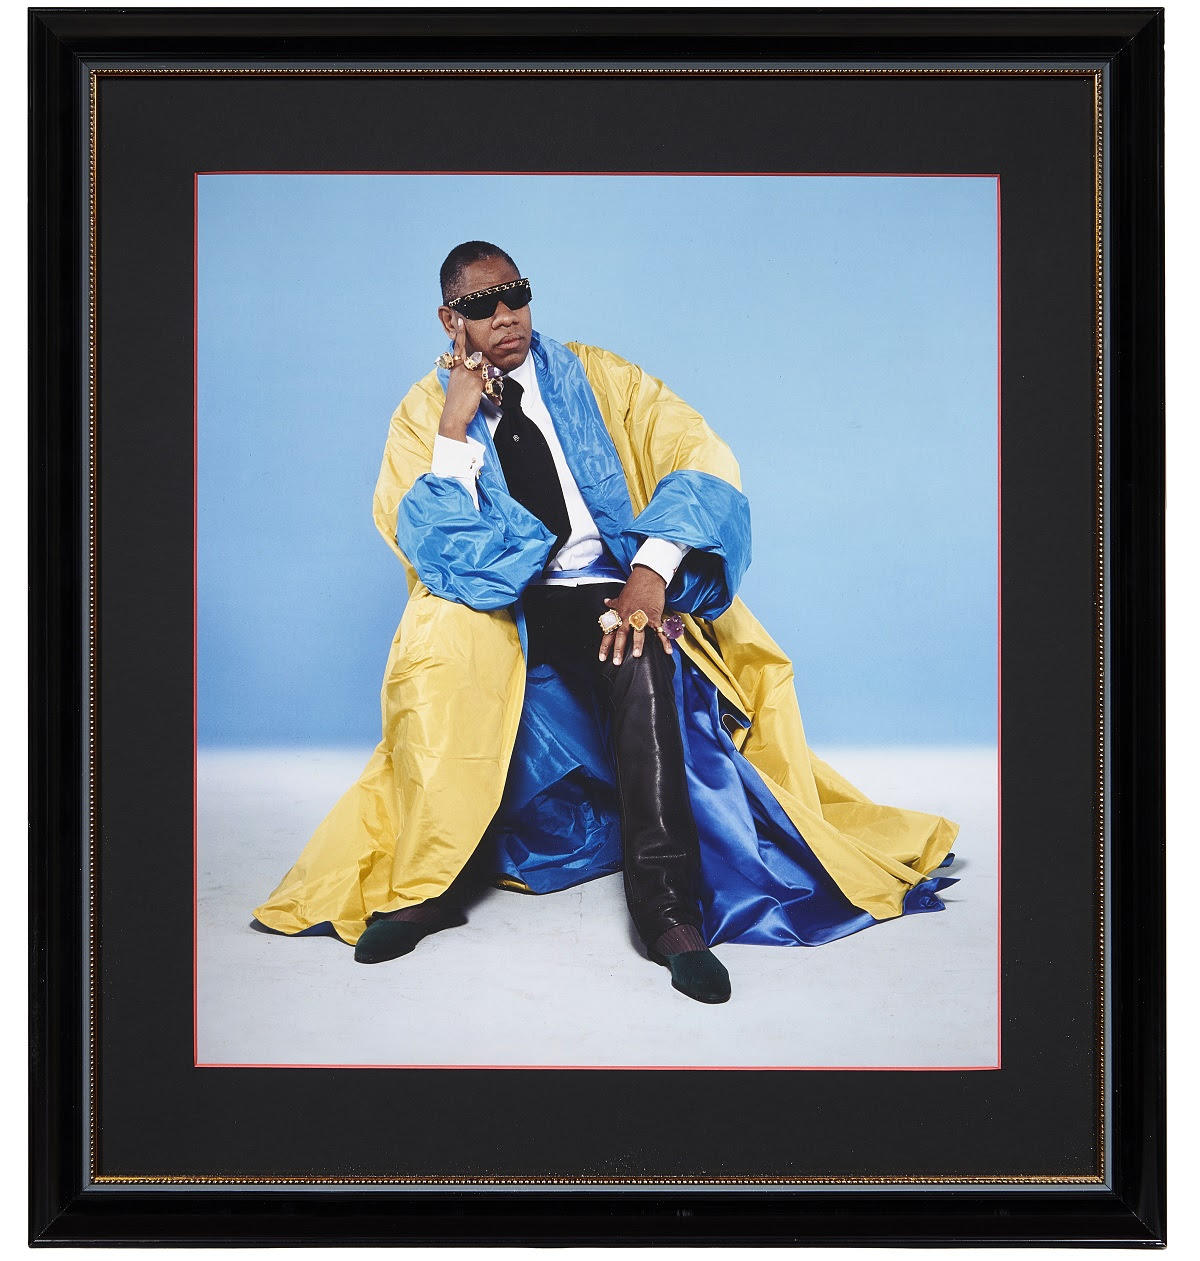 Karl Lagerfeld, 1933-2019 Andre Leon Talley [drapé d'un manteau], 1993, Chromogenic print of the period, Accompanied by its certificate of authenticity, 49 x 40 cm © Artcurial